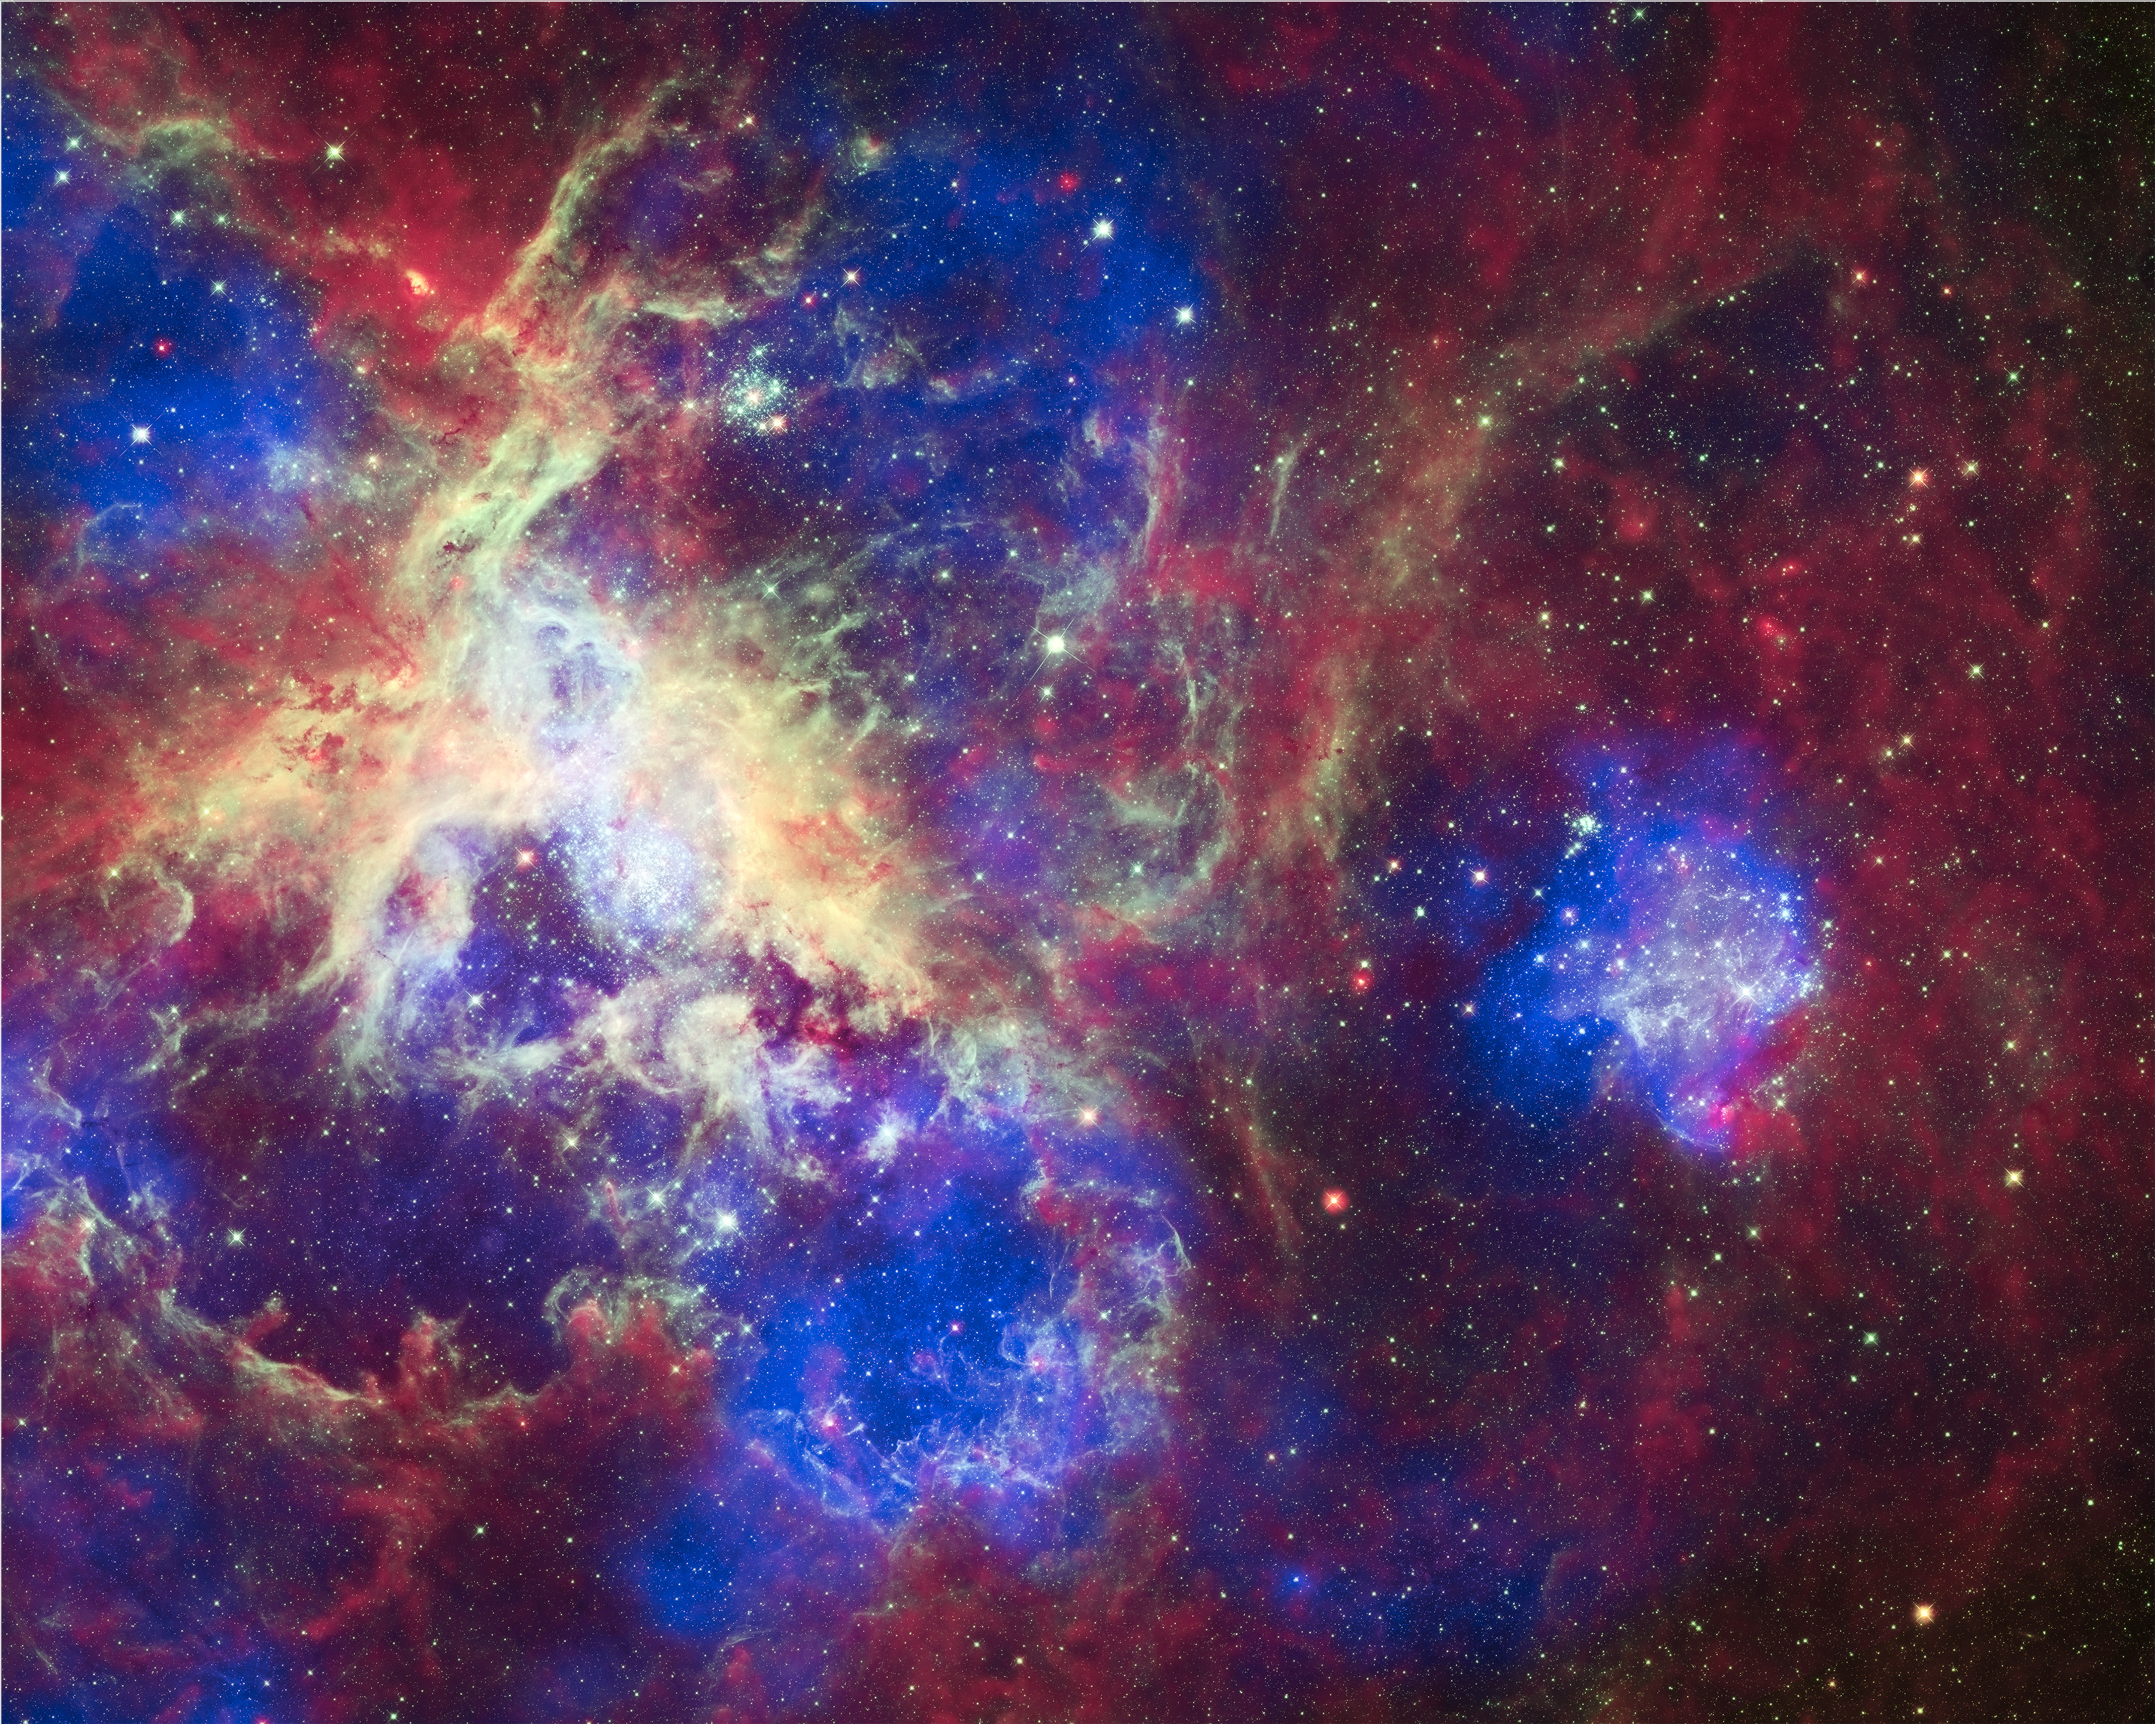 This composite of 30 photos of the Tarantula Nebula, contains data from three telescopes, Chandra (blue), Hubble (green), and Spitzer (red).  Located in the Large Magellanic Cloud, the Tarantula Nebula is one of the largest star-forming regions close to the Milky Way.